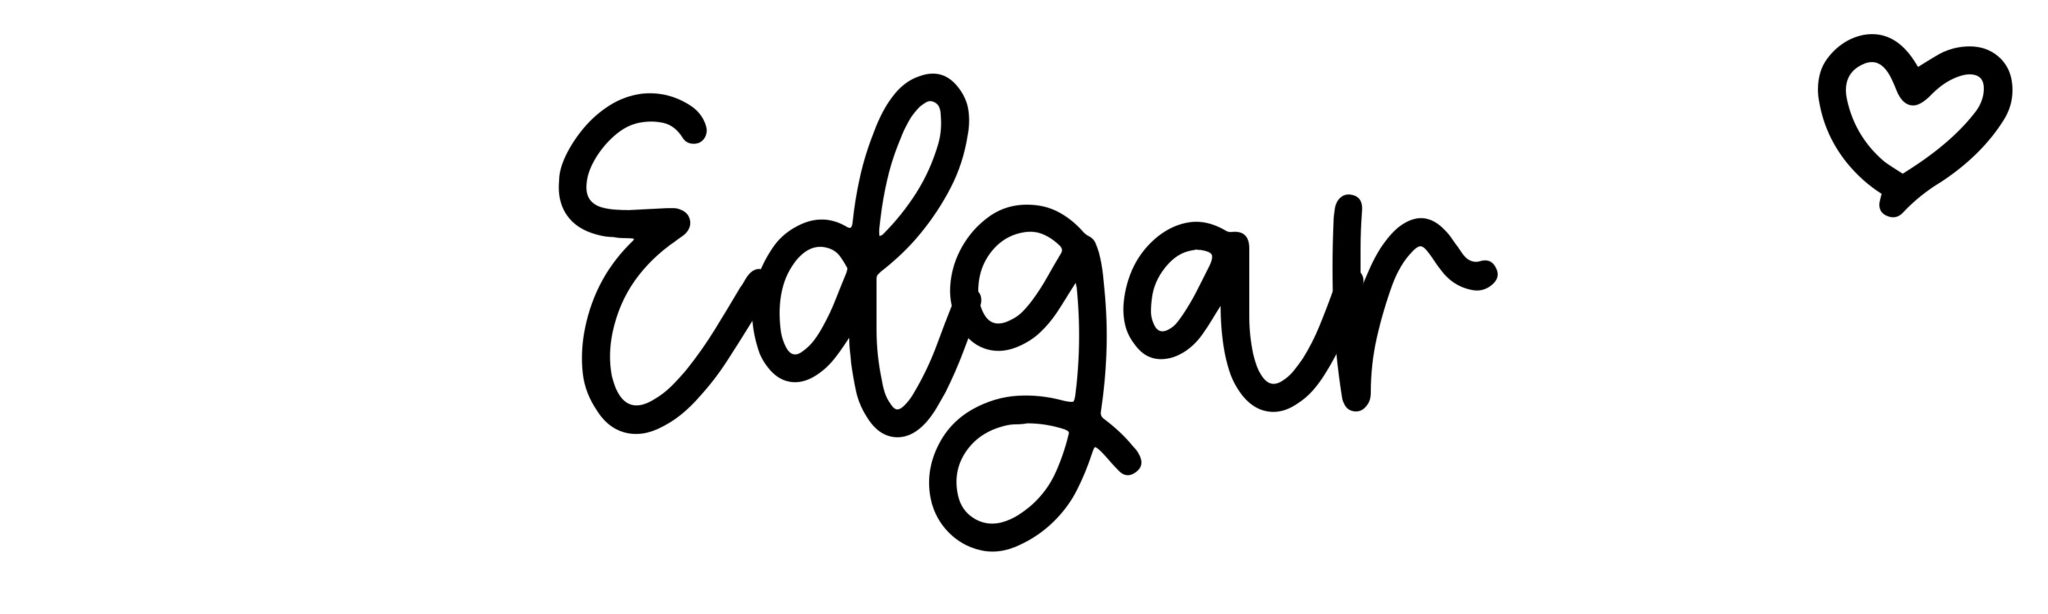 Edgar - Name meaning, origin, variations and more